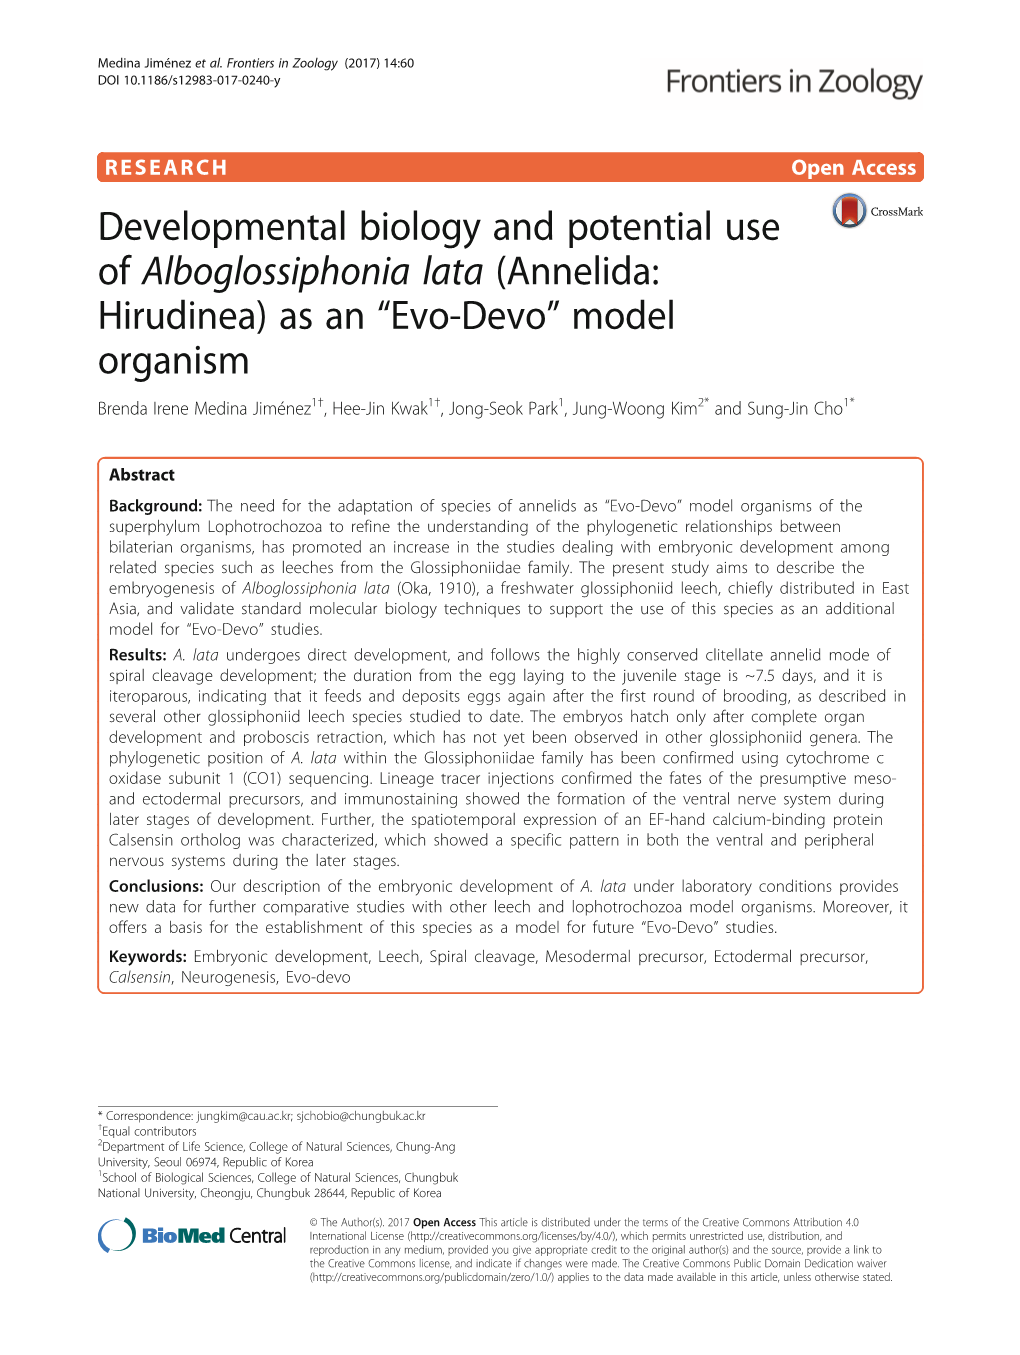 Developmental Biology and Potential Use of Alboglossiphonia Lata